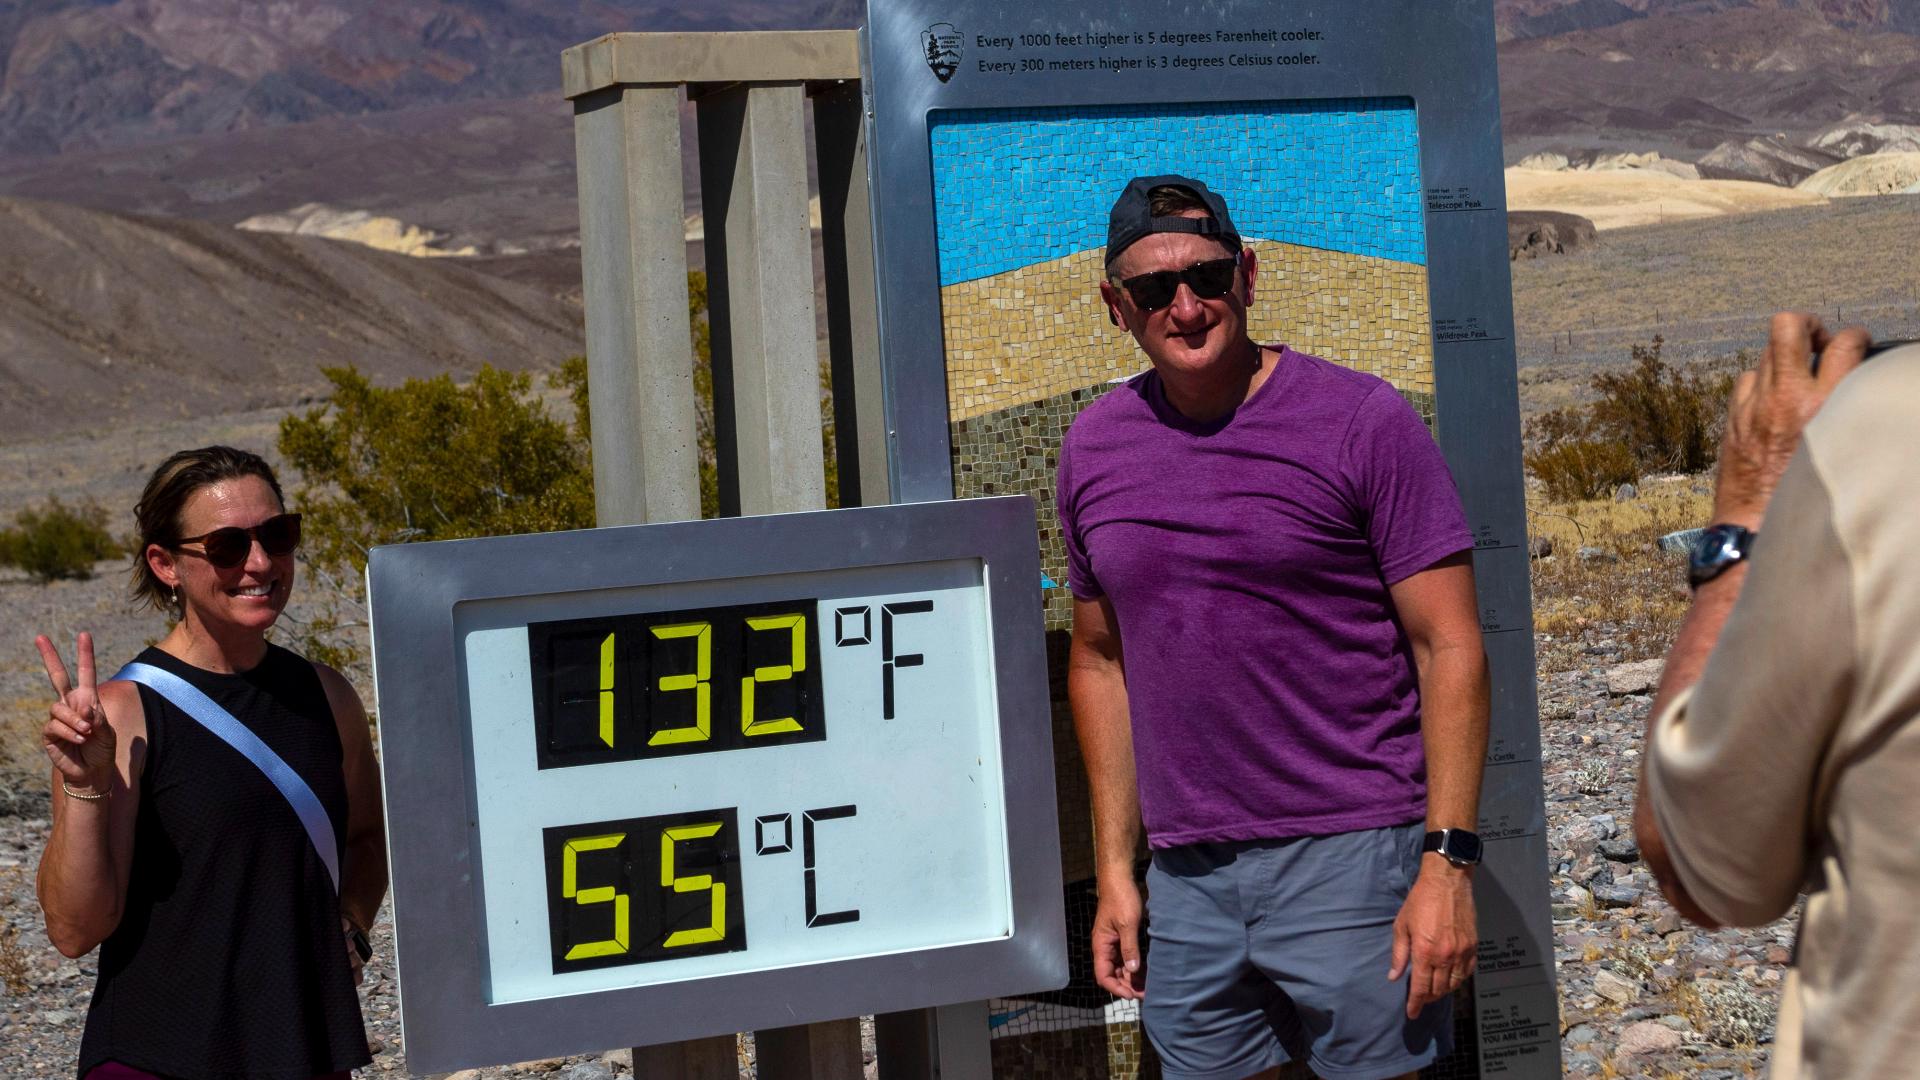 Associated Press journalist Ty ONeil explained that even though he grew up in the desert, Death Valley right now "is a different level of heat."